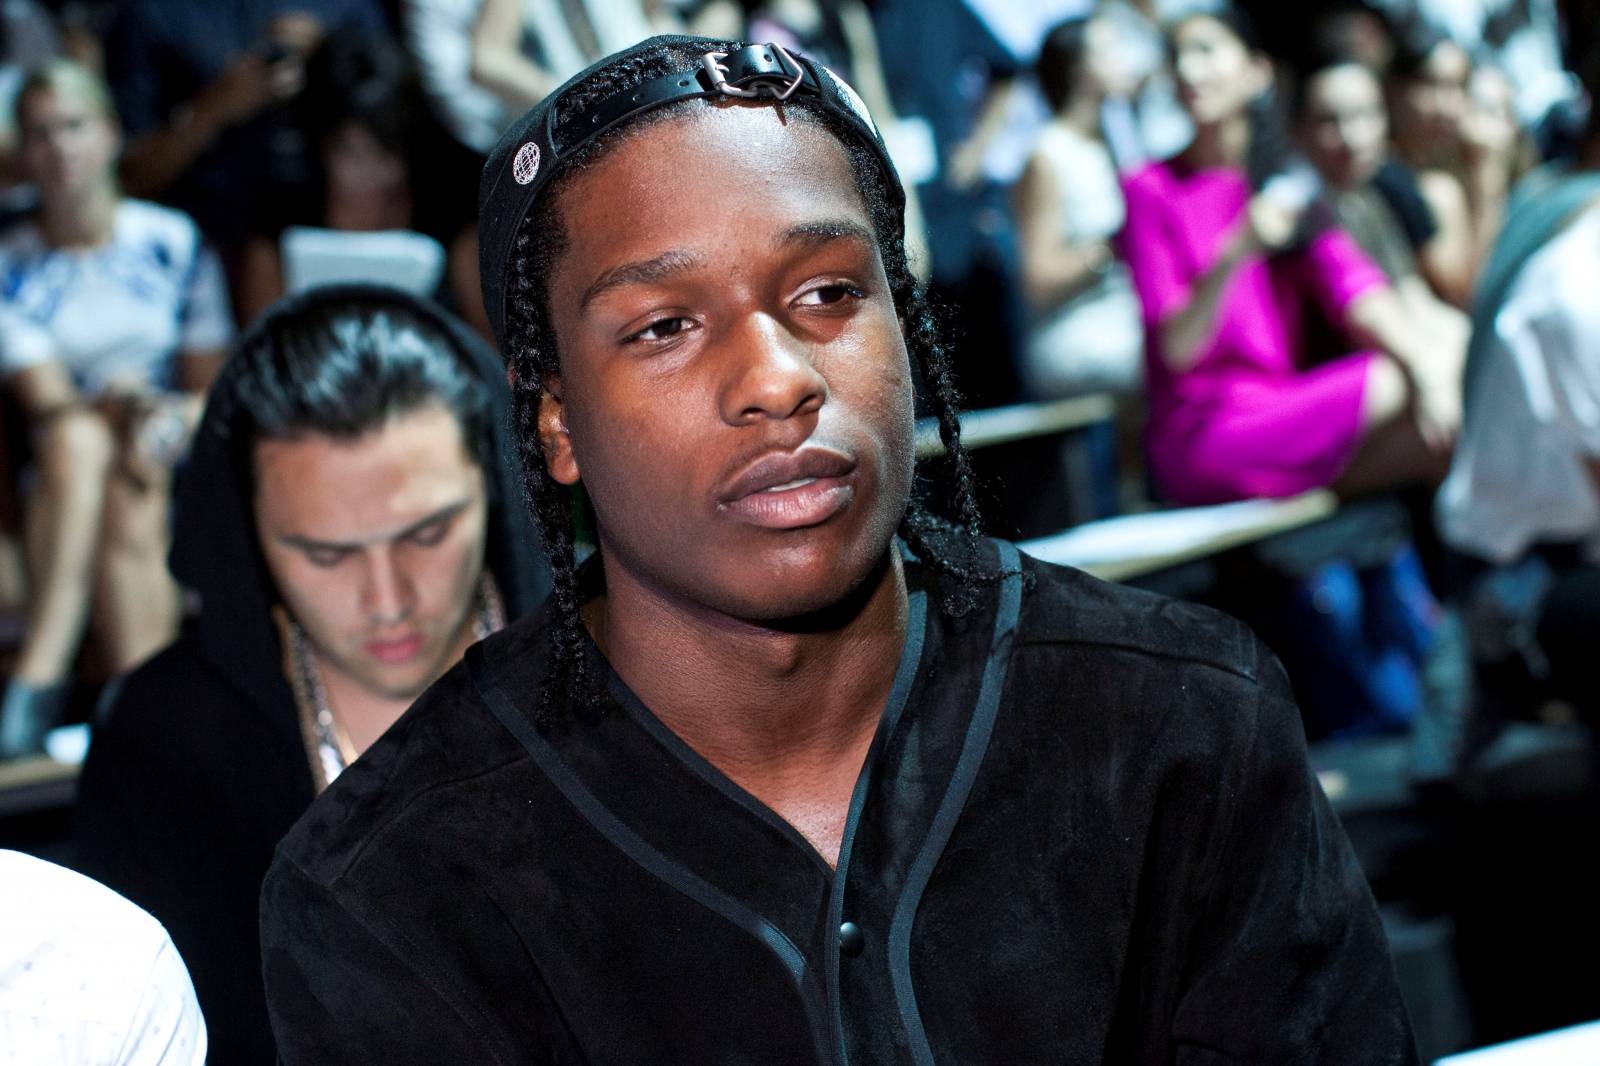 FILE PHOTO: U.S. rapper ASAP Rocky attends the Alexander Wang Spring/Summer 2013 collection during New York Fashion Week